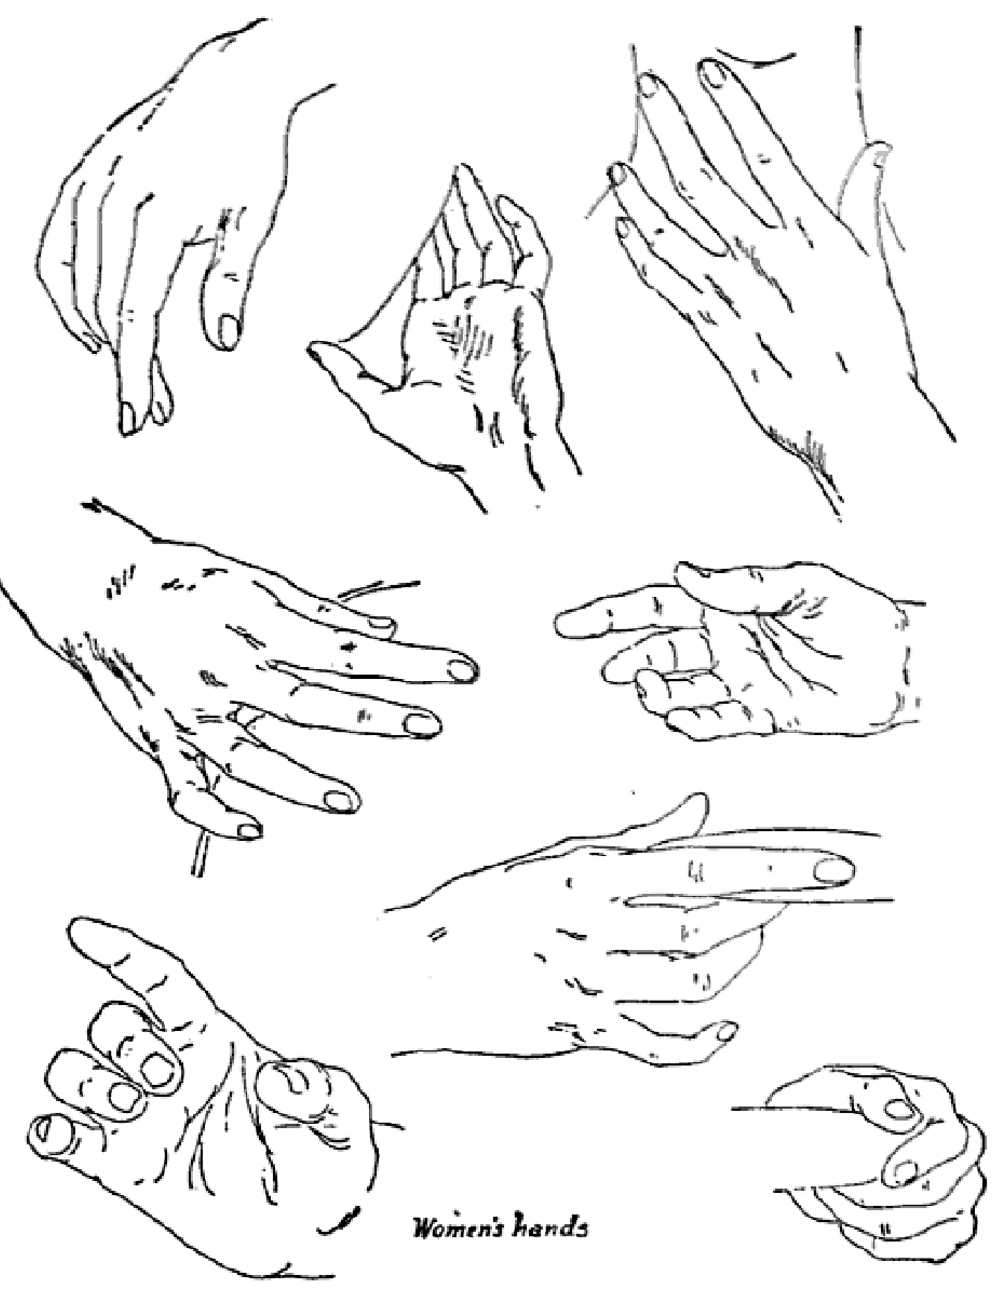 Drawing Hands : Techniques for How to Draw Hands With References and ...